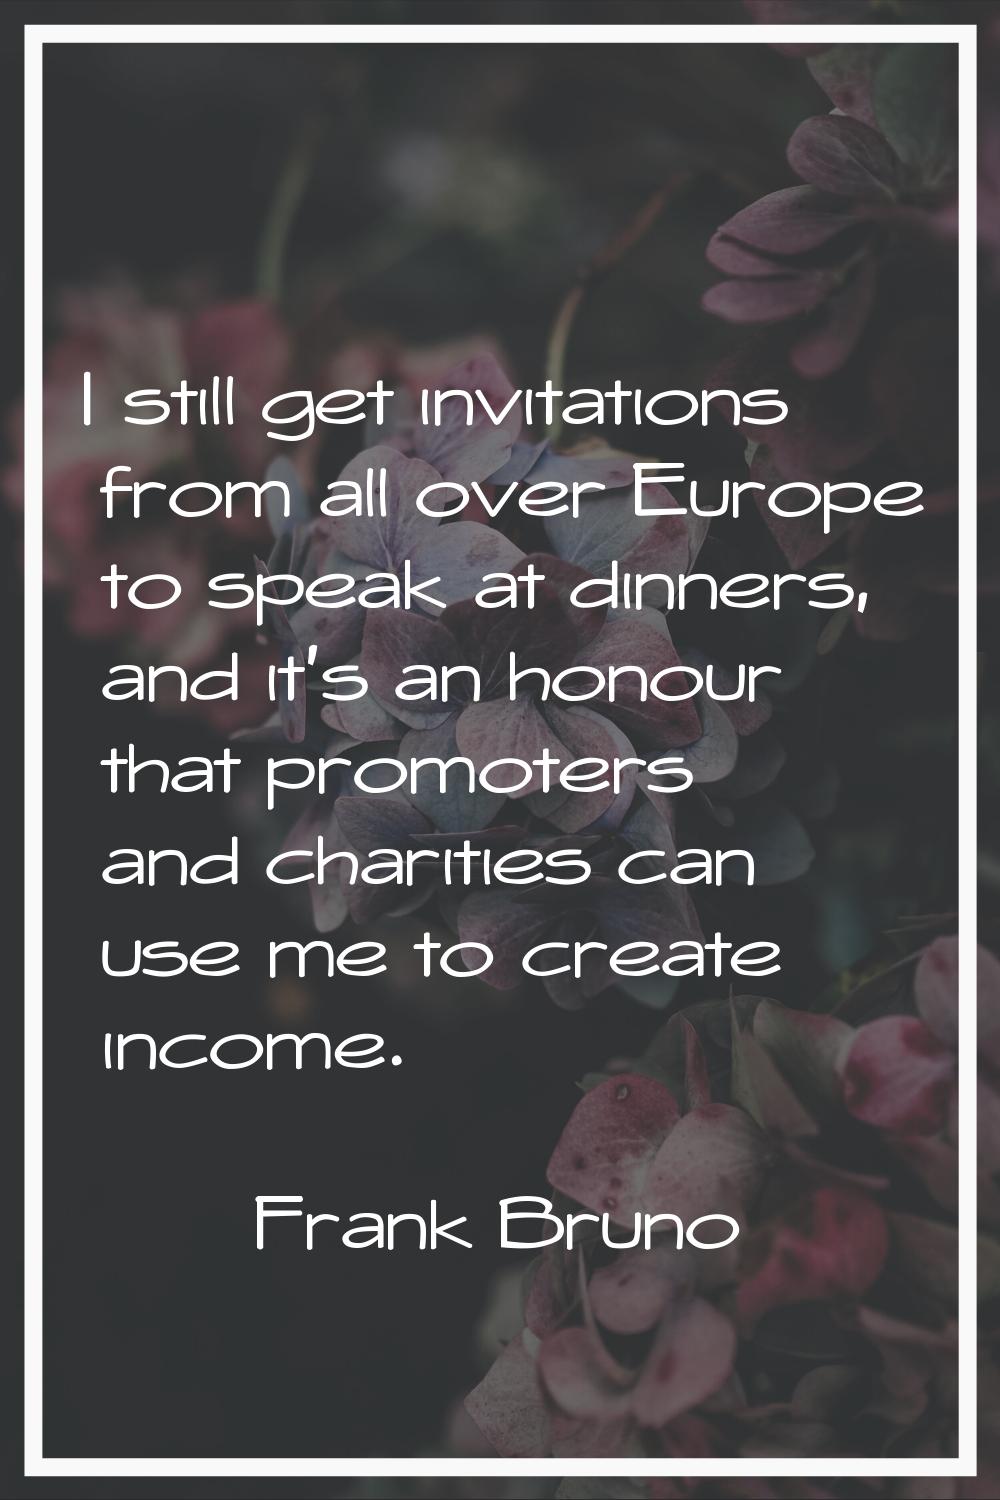 I still get invitations from all over Europe to speak at dinners, and it's an honour that promoters